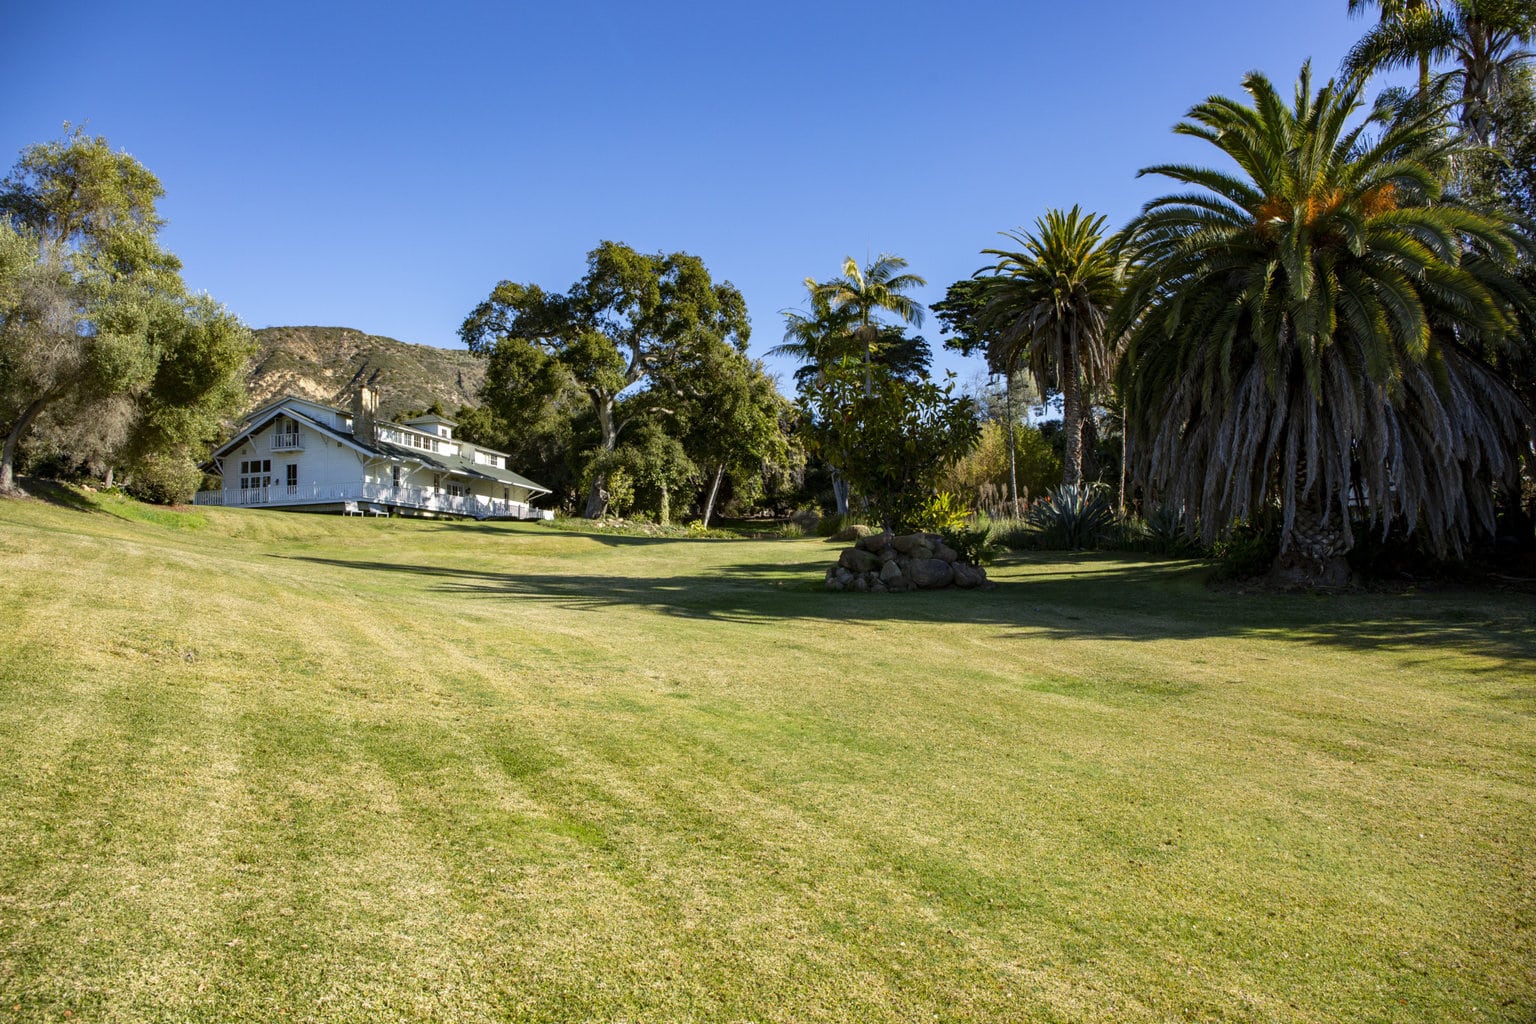 green-lawn-with-ranch-style-home-in-background-in-carpinteria-california